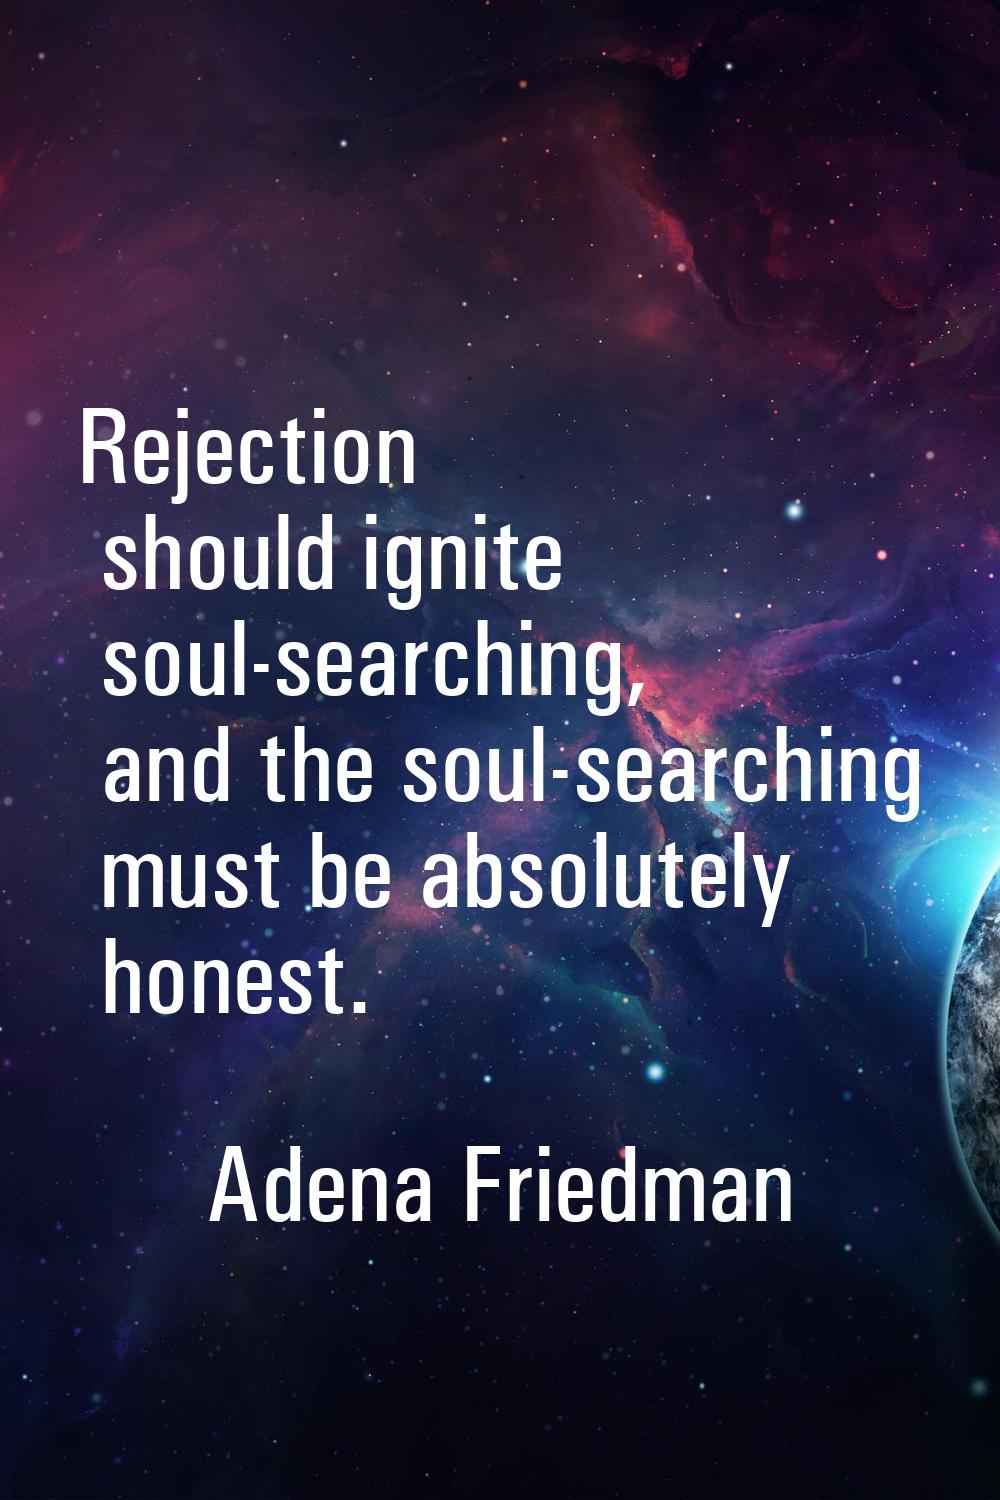 Rejection should ignite soul-searching, and the soul-searching must be absolutely honest.